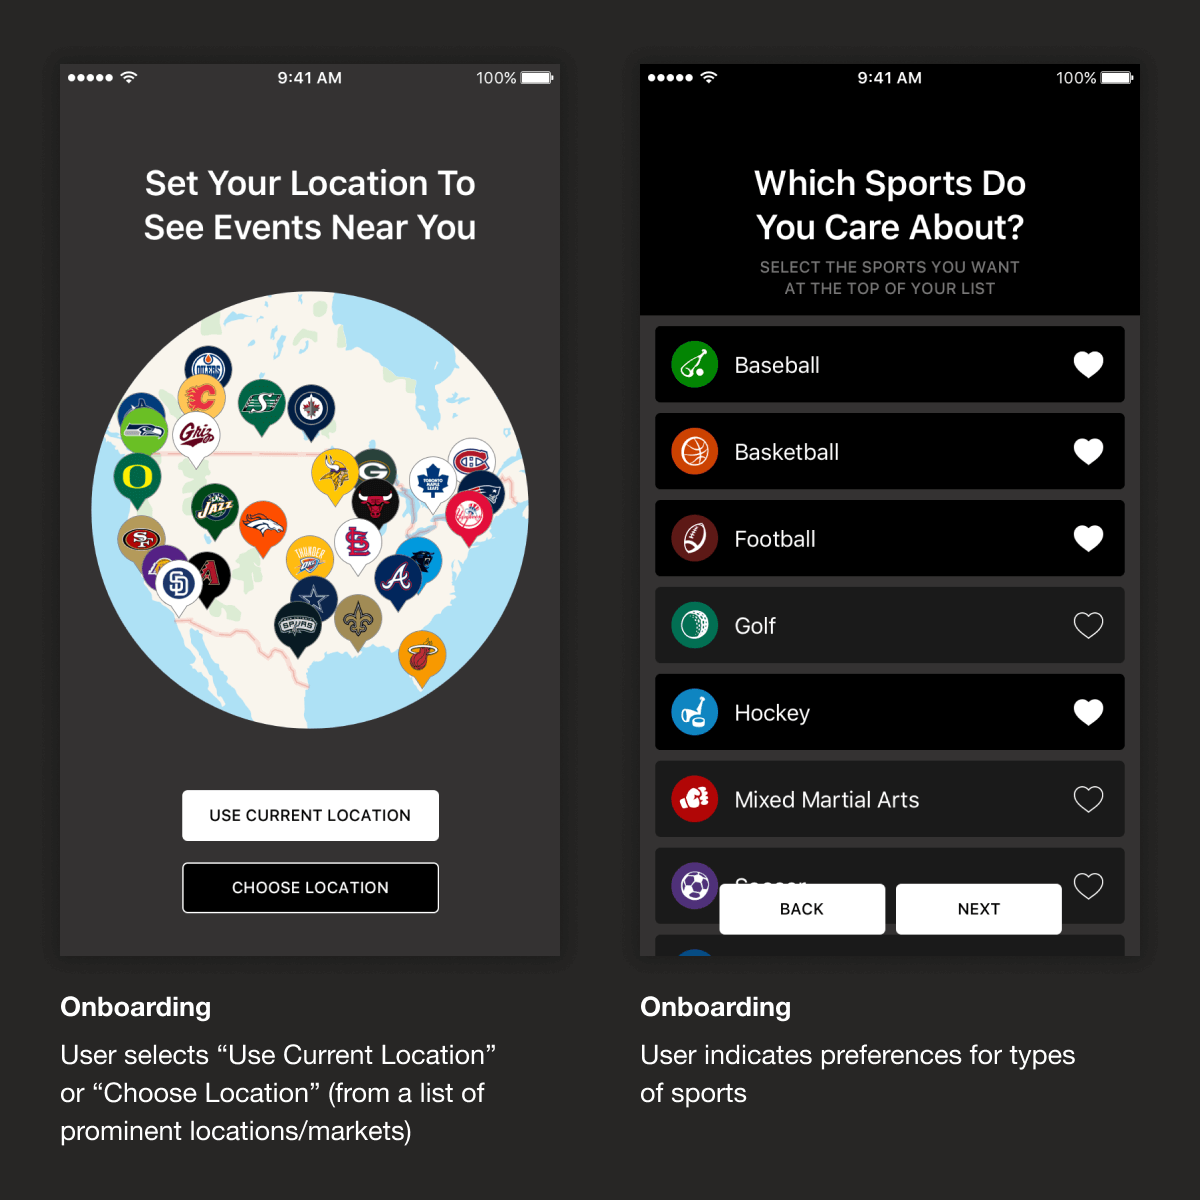 Two onboarding screens: ‘Set Your Location To See Events Near You’, where the user shares their location, and ‘Which Sports Do You Care About?’, where the user indicates preferences for types of sports